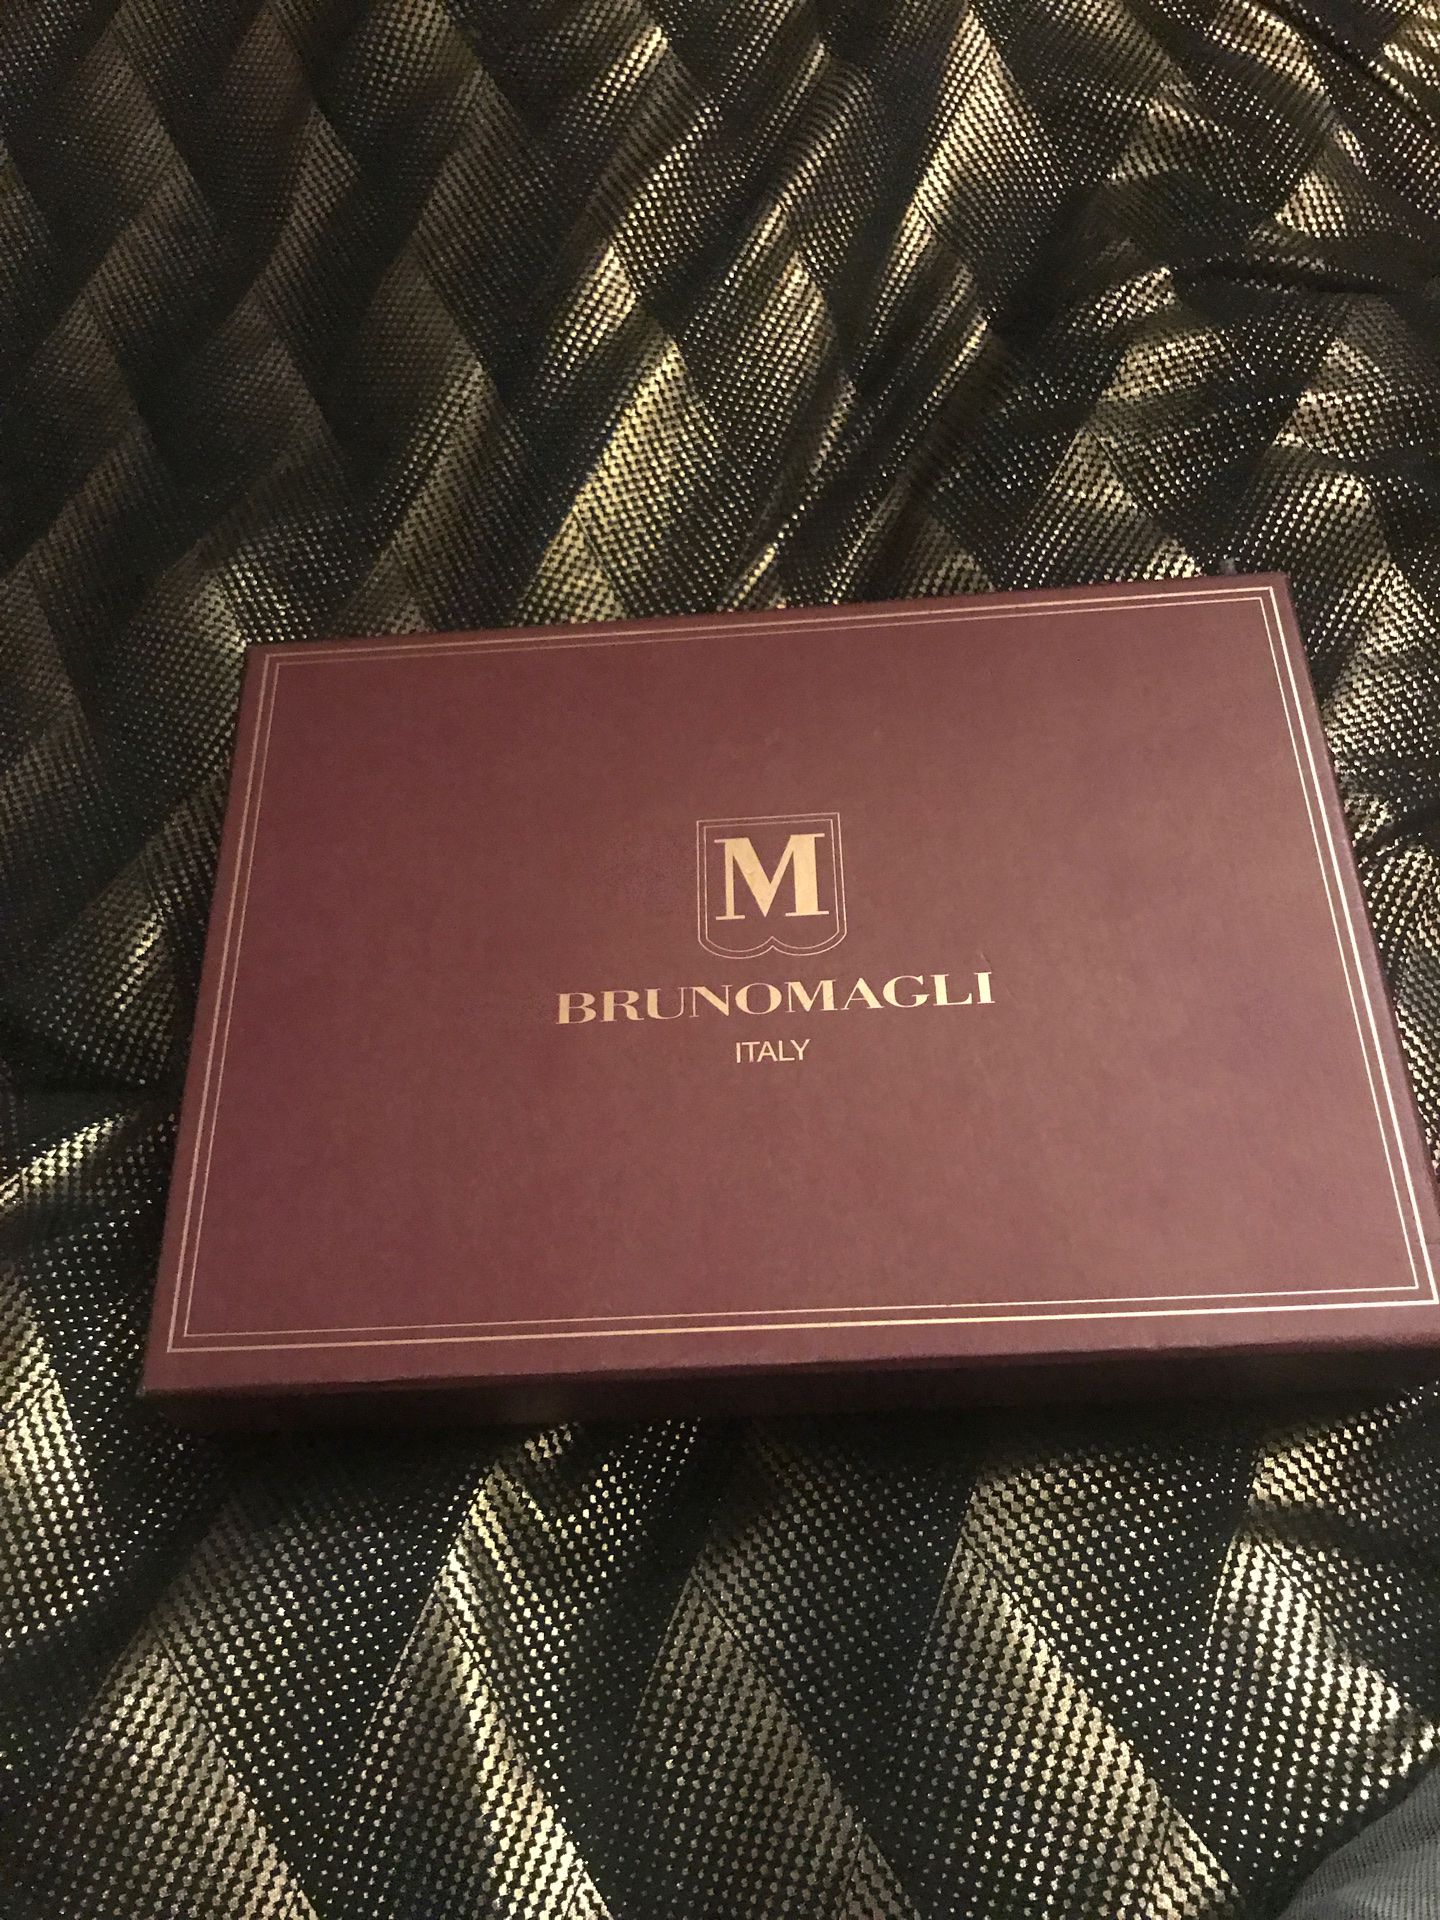 Bruno Magli belt set with wallet 🇮🇹 Italy